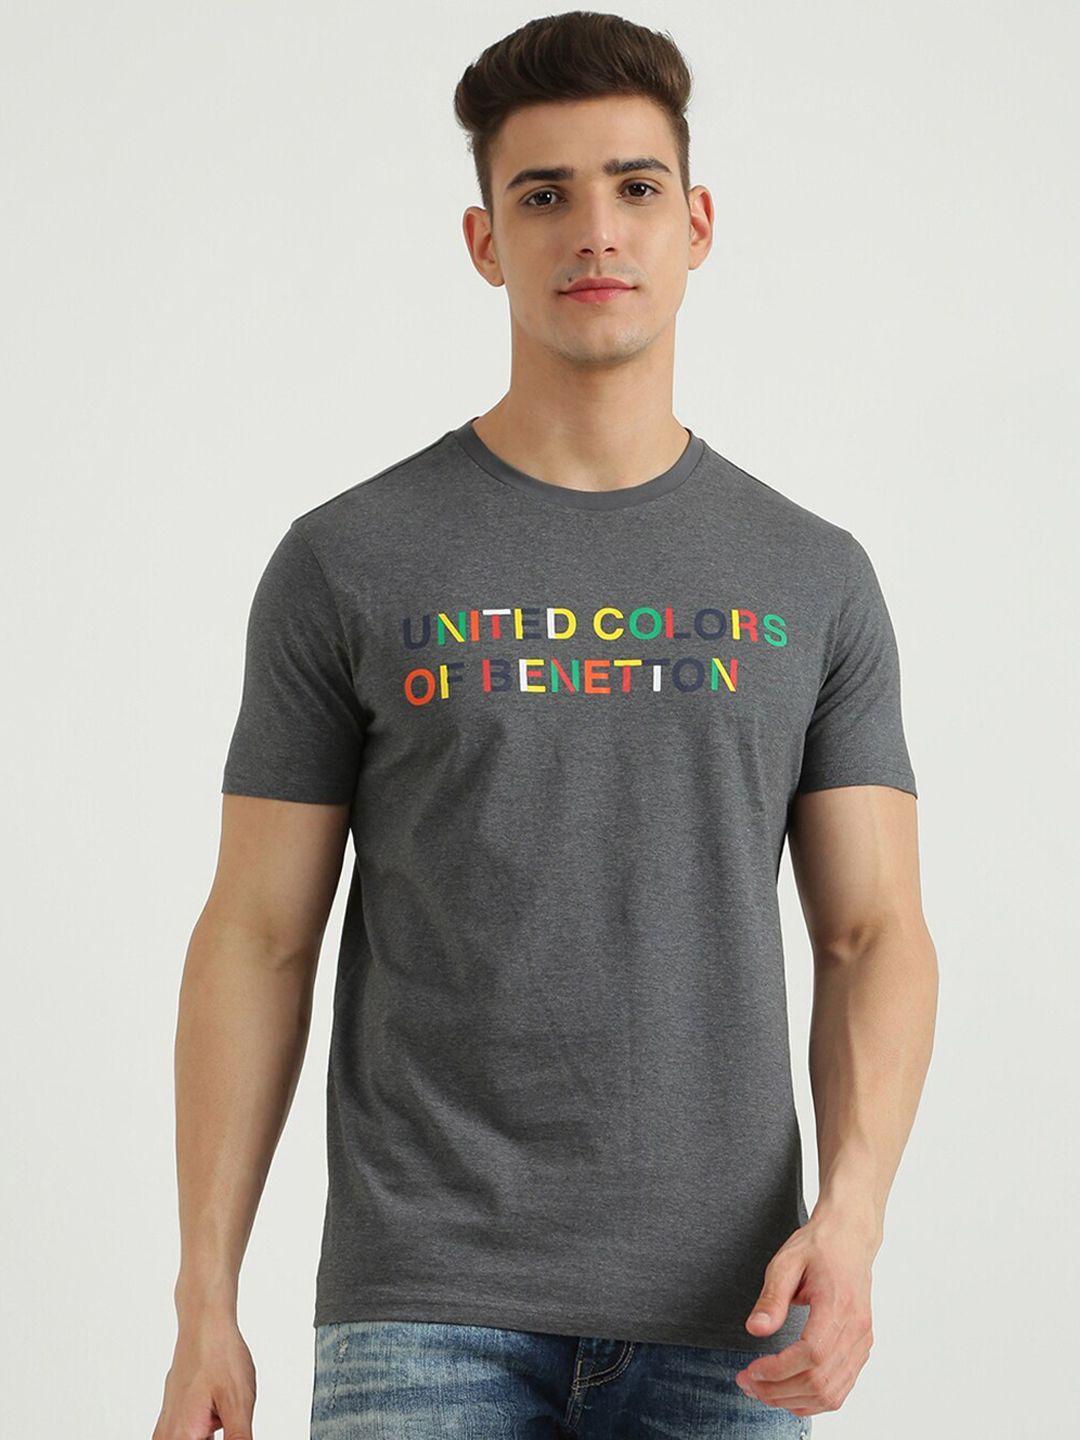 united colors of benetton men grey typography printed cotton t-shirt